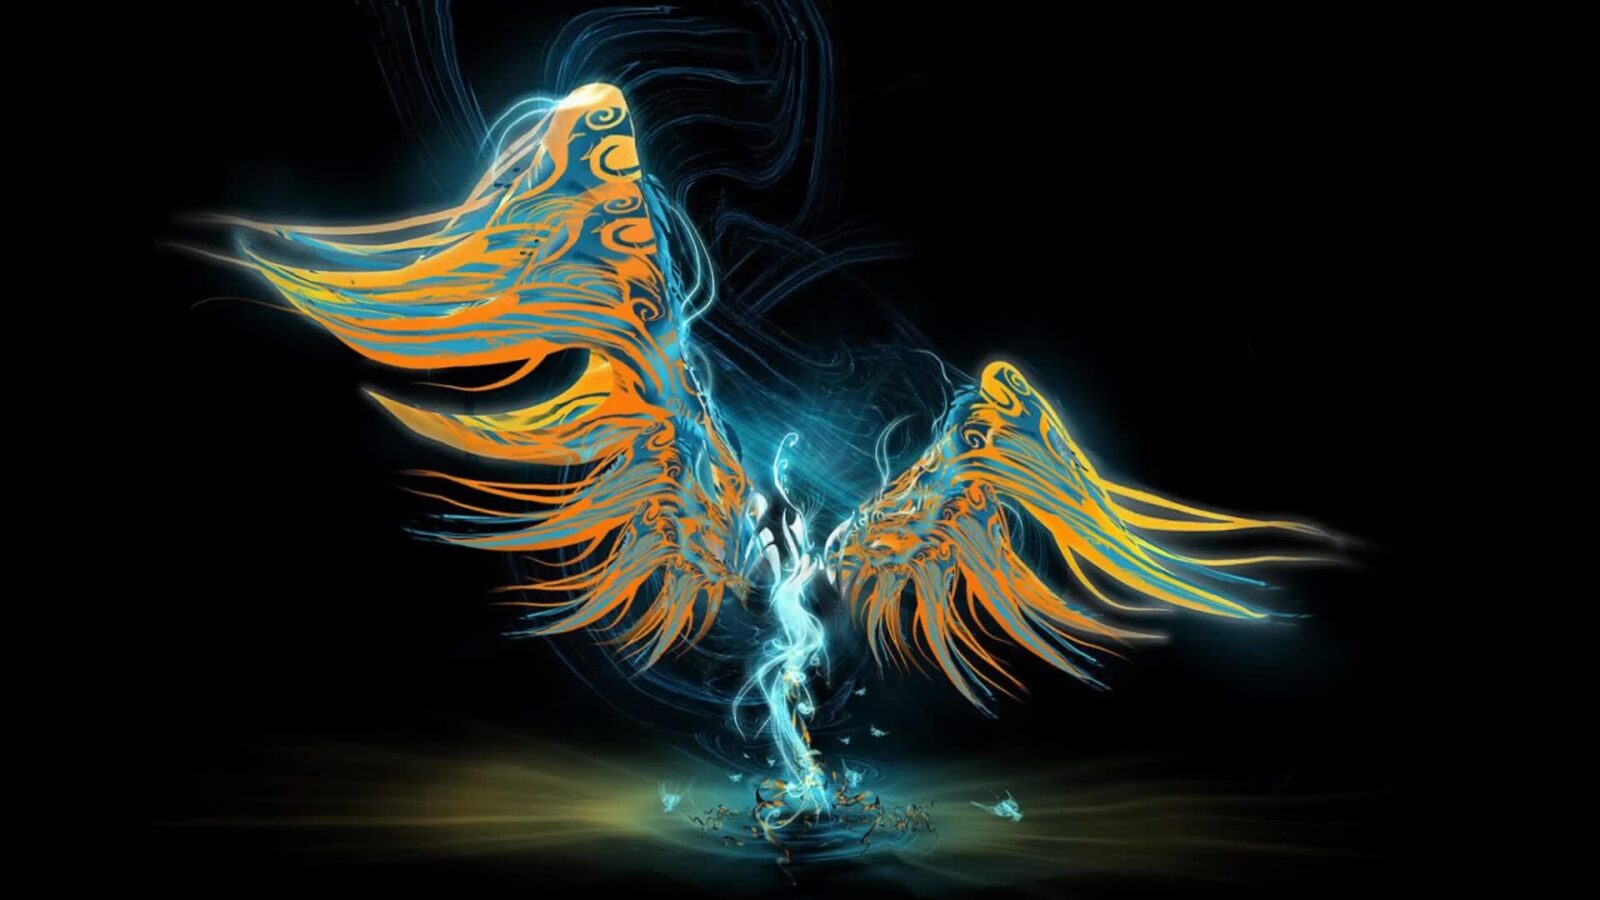 LiveWallpapers4Free.com | Dancing Angel Abstract Illustration - Free Live Wallpaper